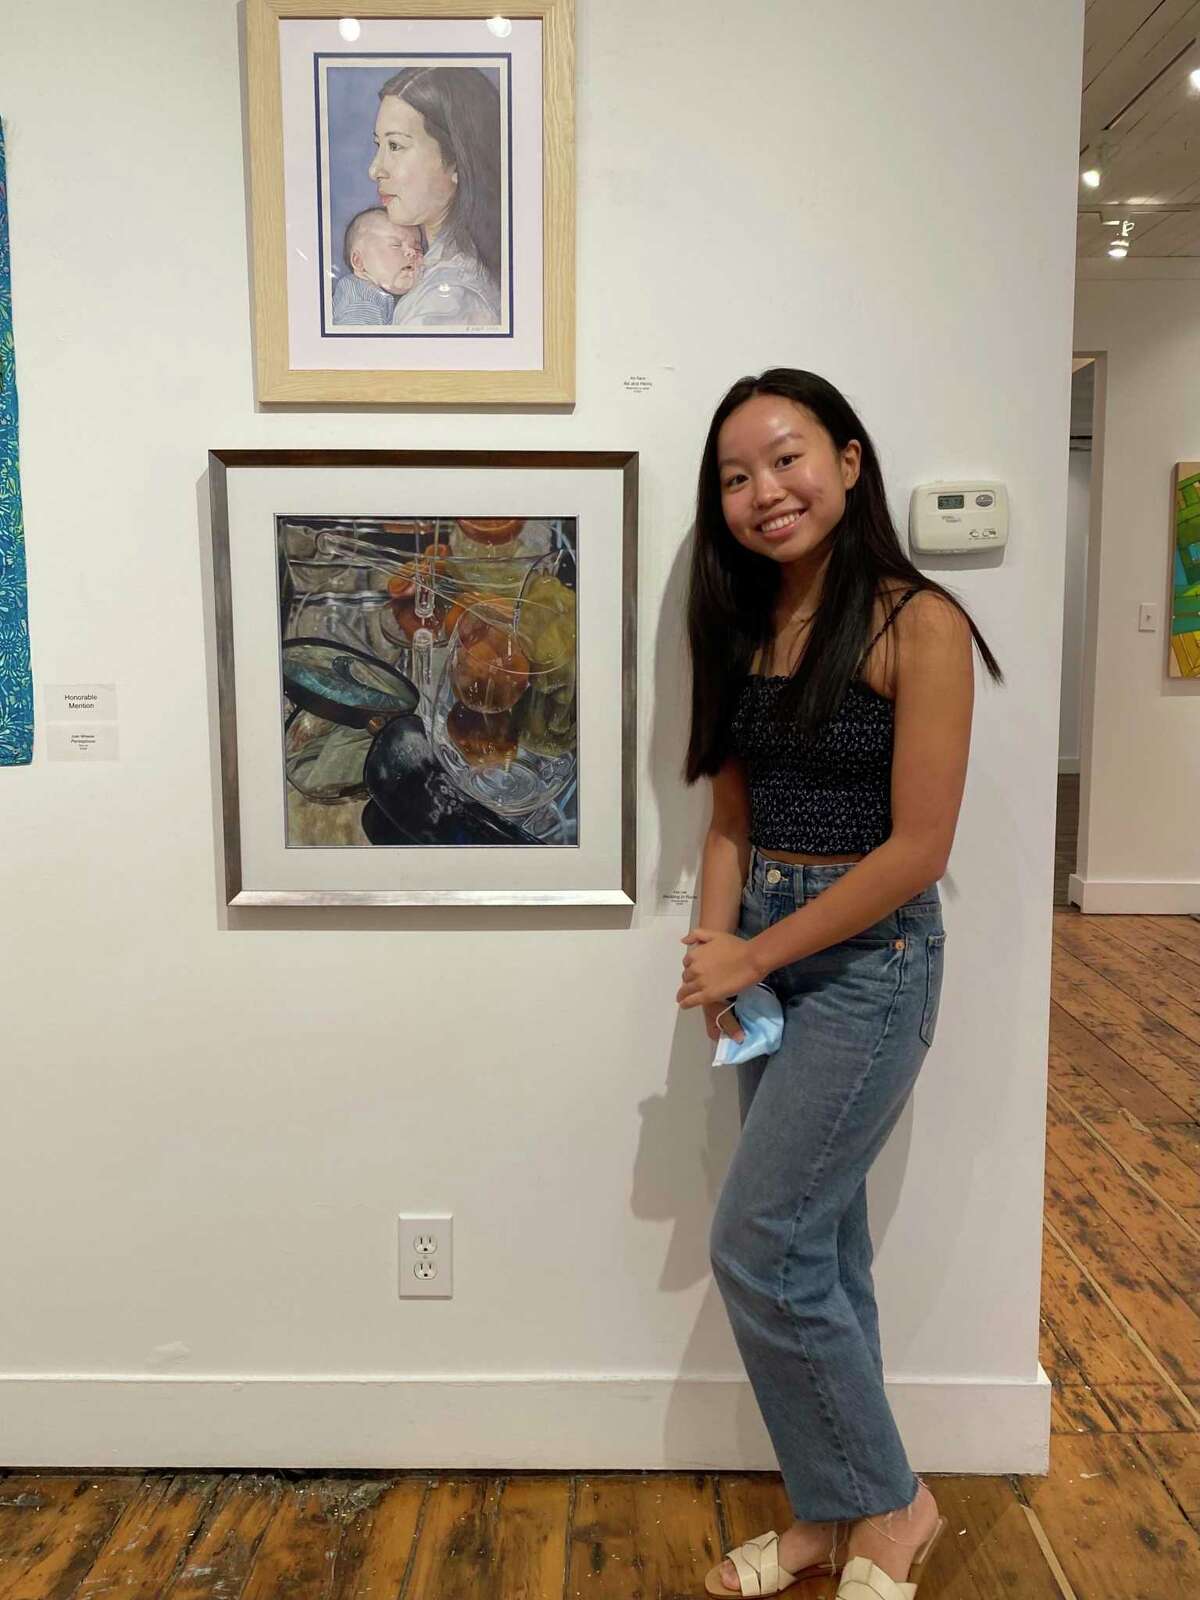 Ava Lee, 17, stands by her art at the Ridgefield Guild of Artists Sept. 10, 2021. Her latest exhibit, on display at the Greenwich Arts Society, shows pieces of her journey with scoliosis.